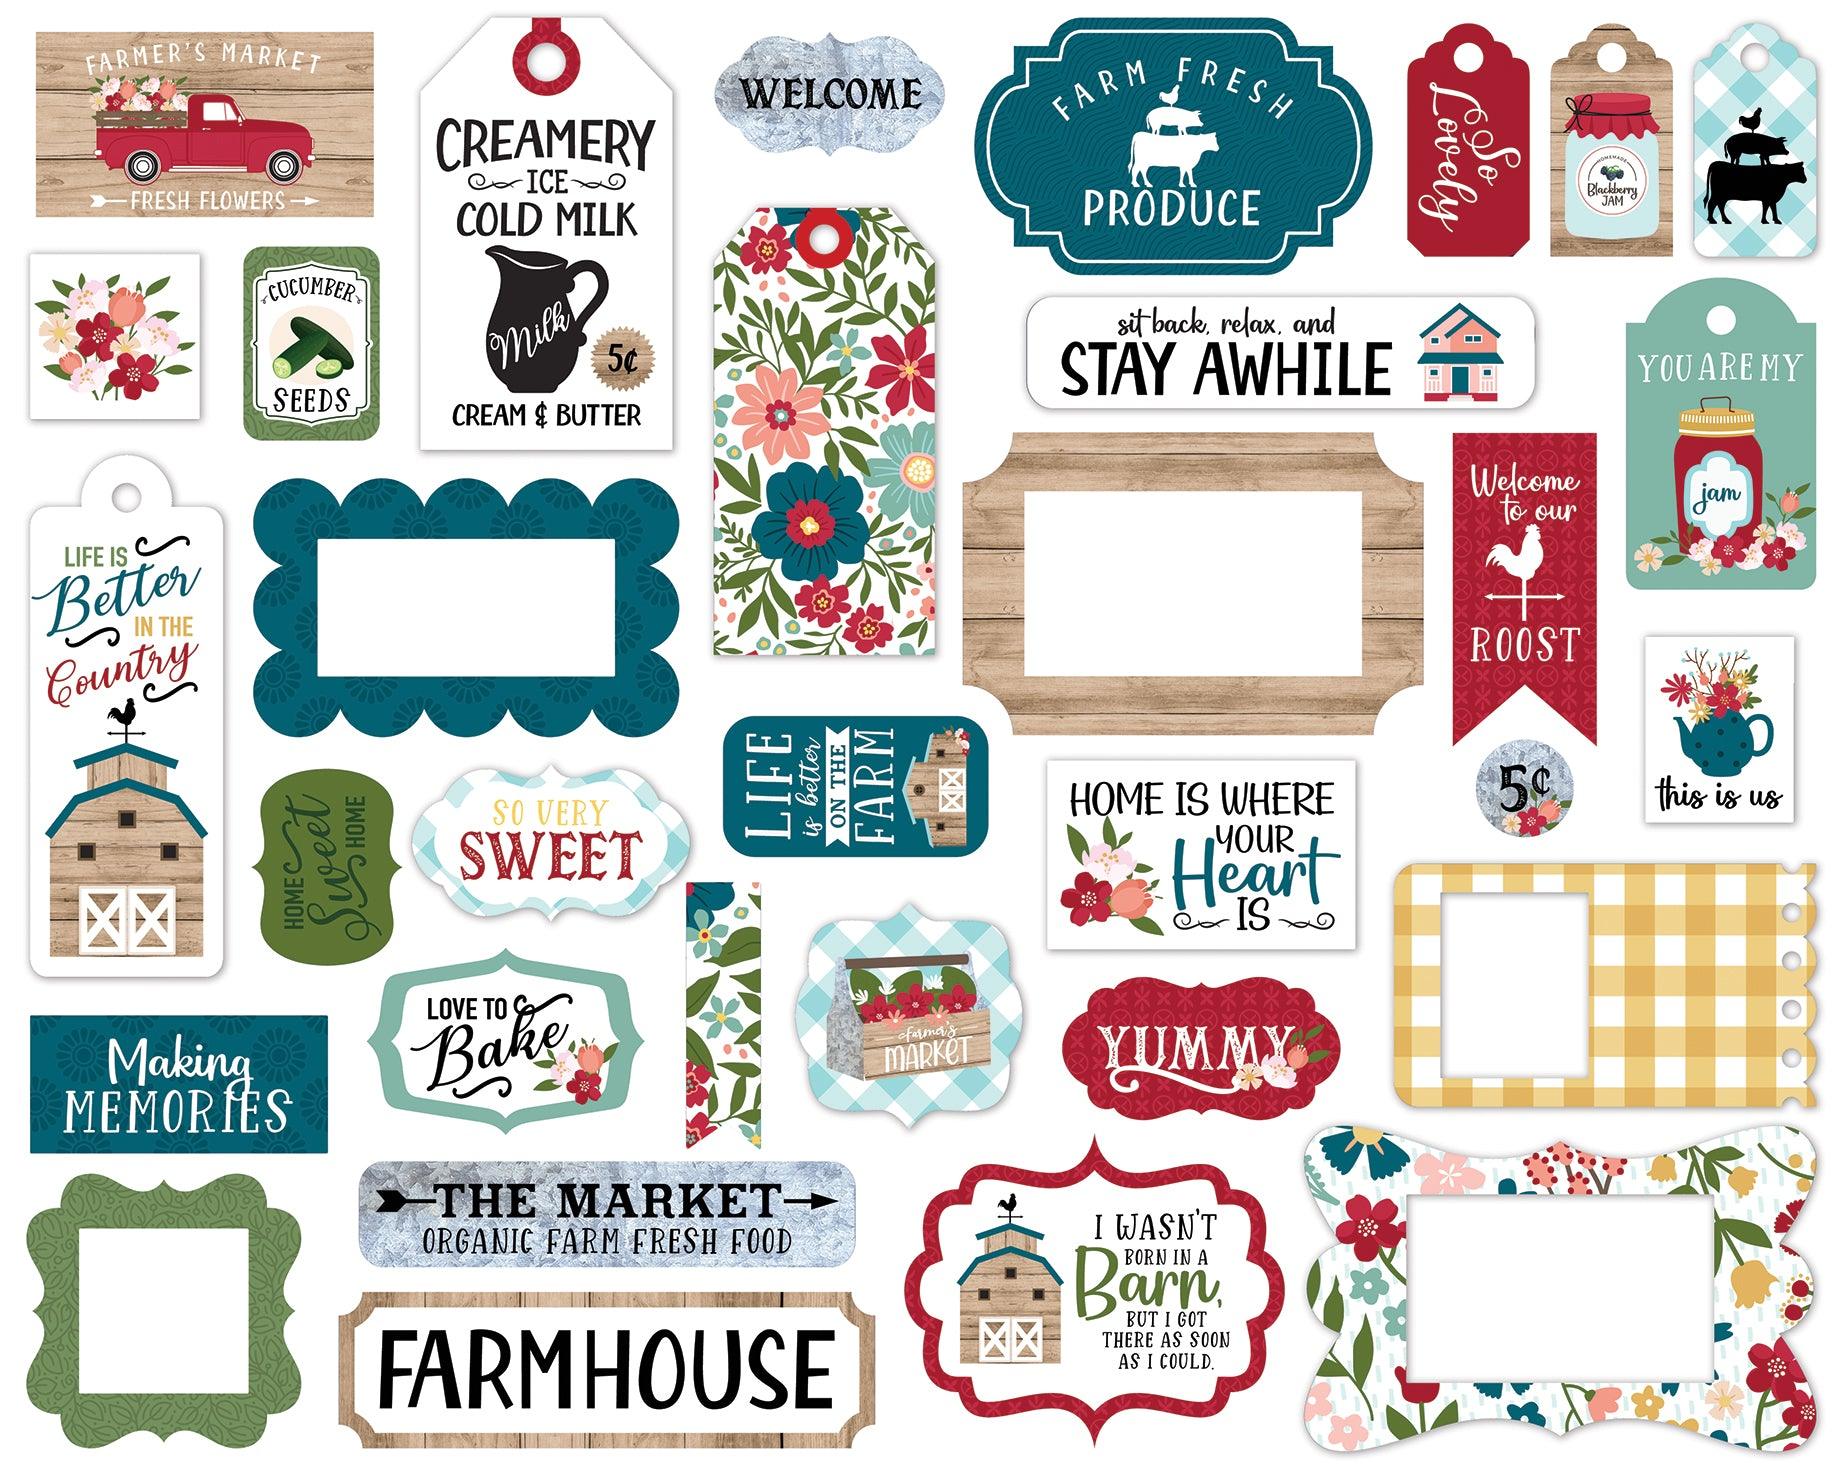 Farmer's Market Collection 5 x 5 Scrapbook Tags & Frames Die Cuts by Echo Park Paper - Scrapbook Supply Companies